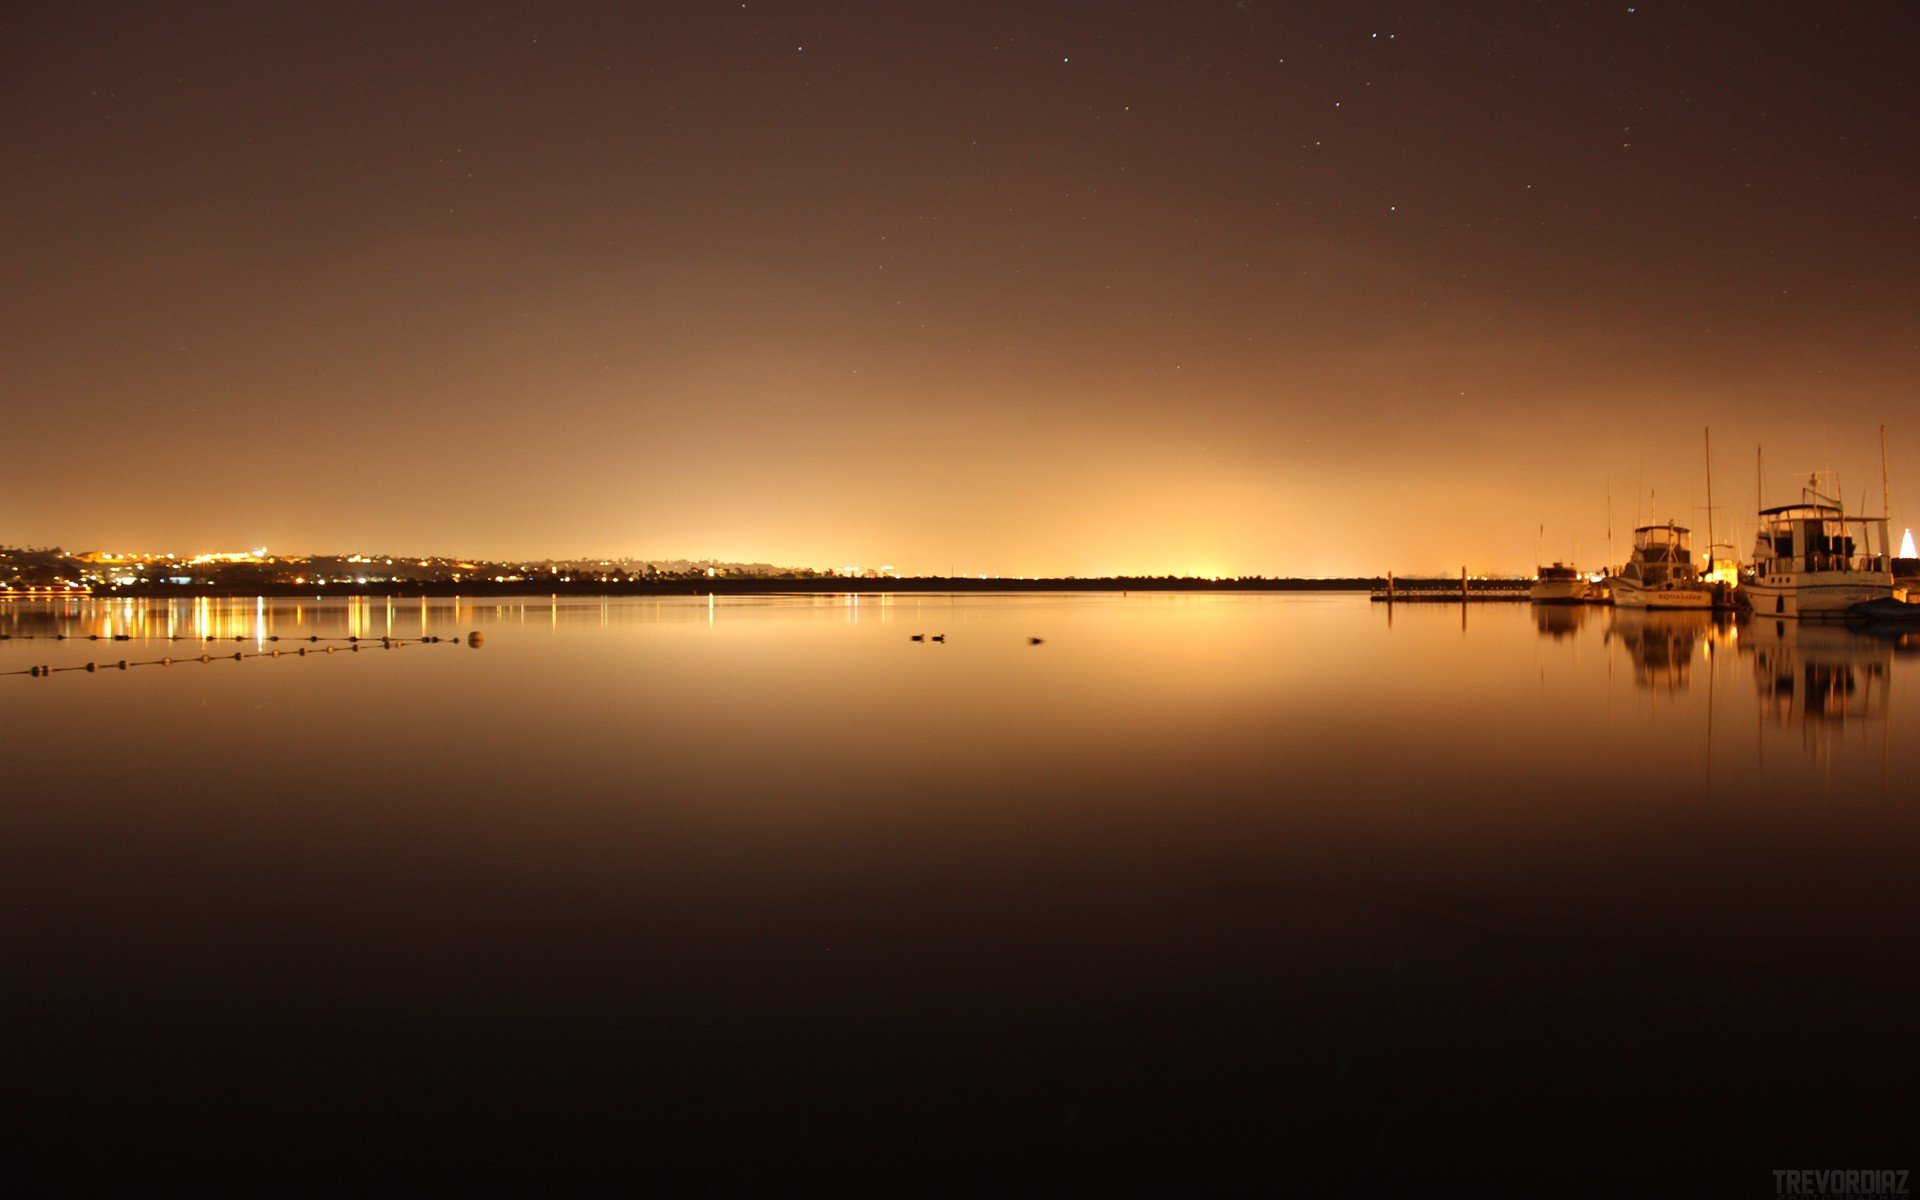 light, Horizon, Cityscapes, Night, Lights, Calm, Boats, Lakes, Rivers, Skyscapes, Docks, Harbours Wallpaper